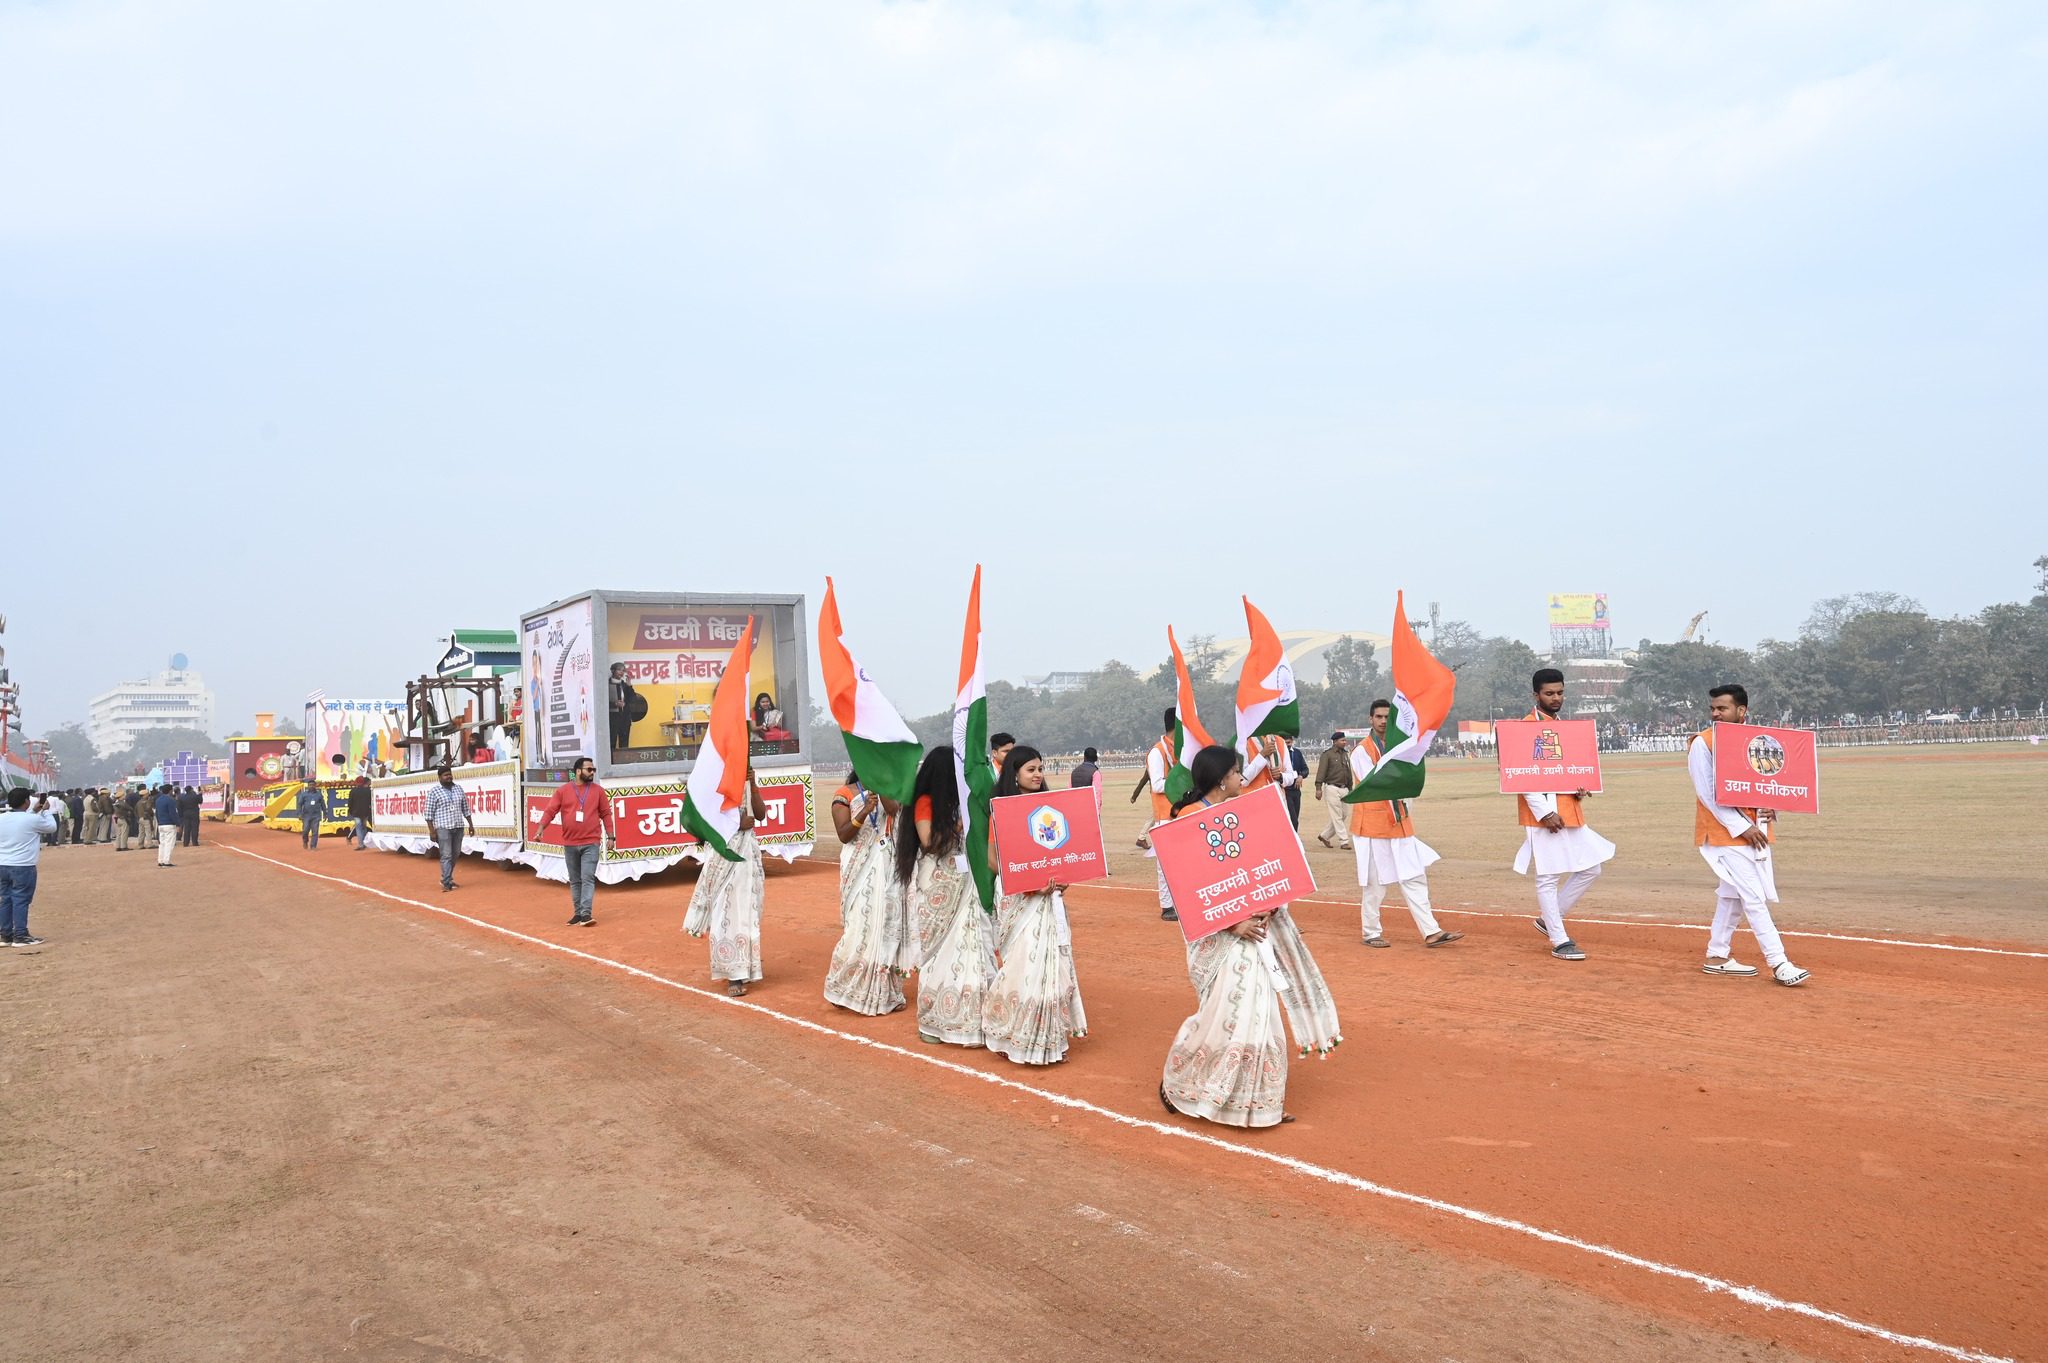 Tableau presentation on the occasion of Republic Day 2023